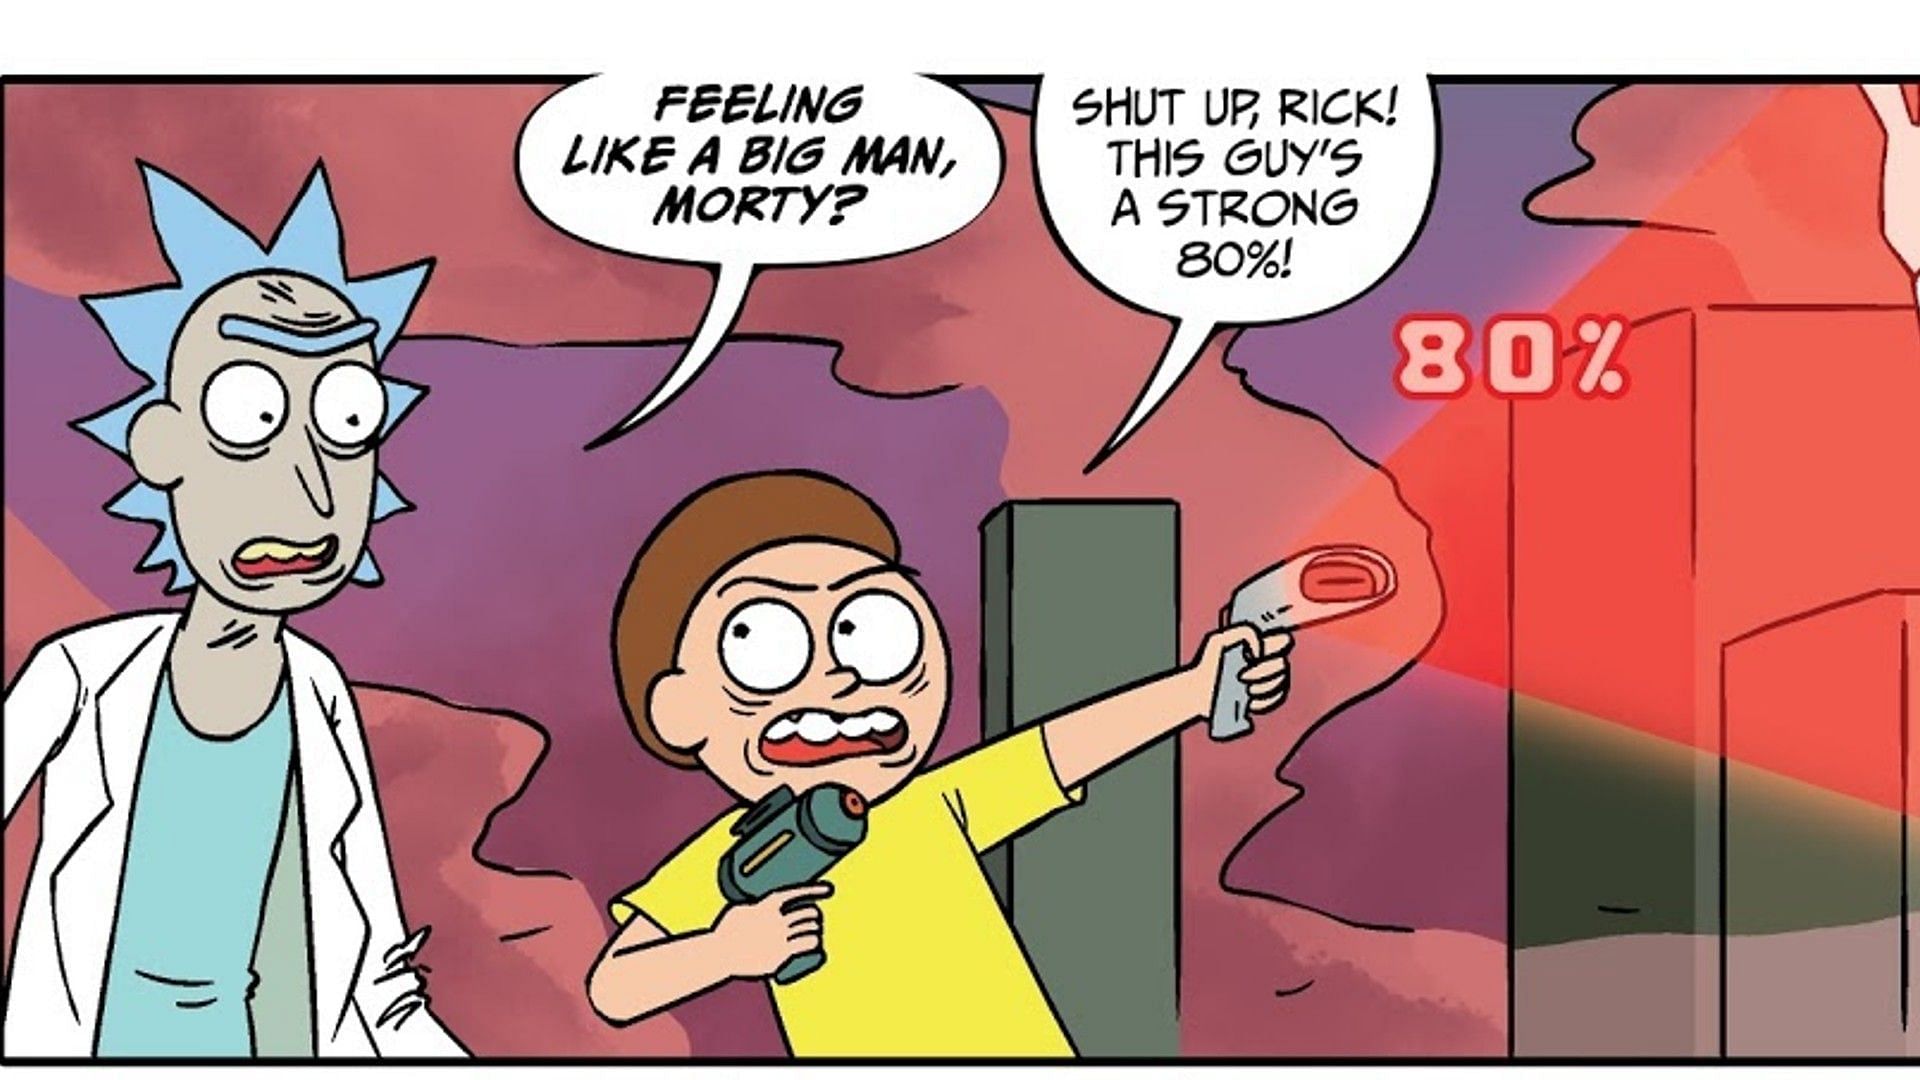 Issue #29 sees Morty stopping other dictators from coming to be (Image via Oni Press)